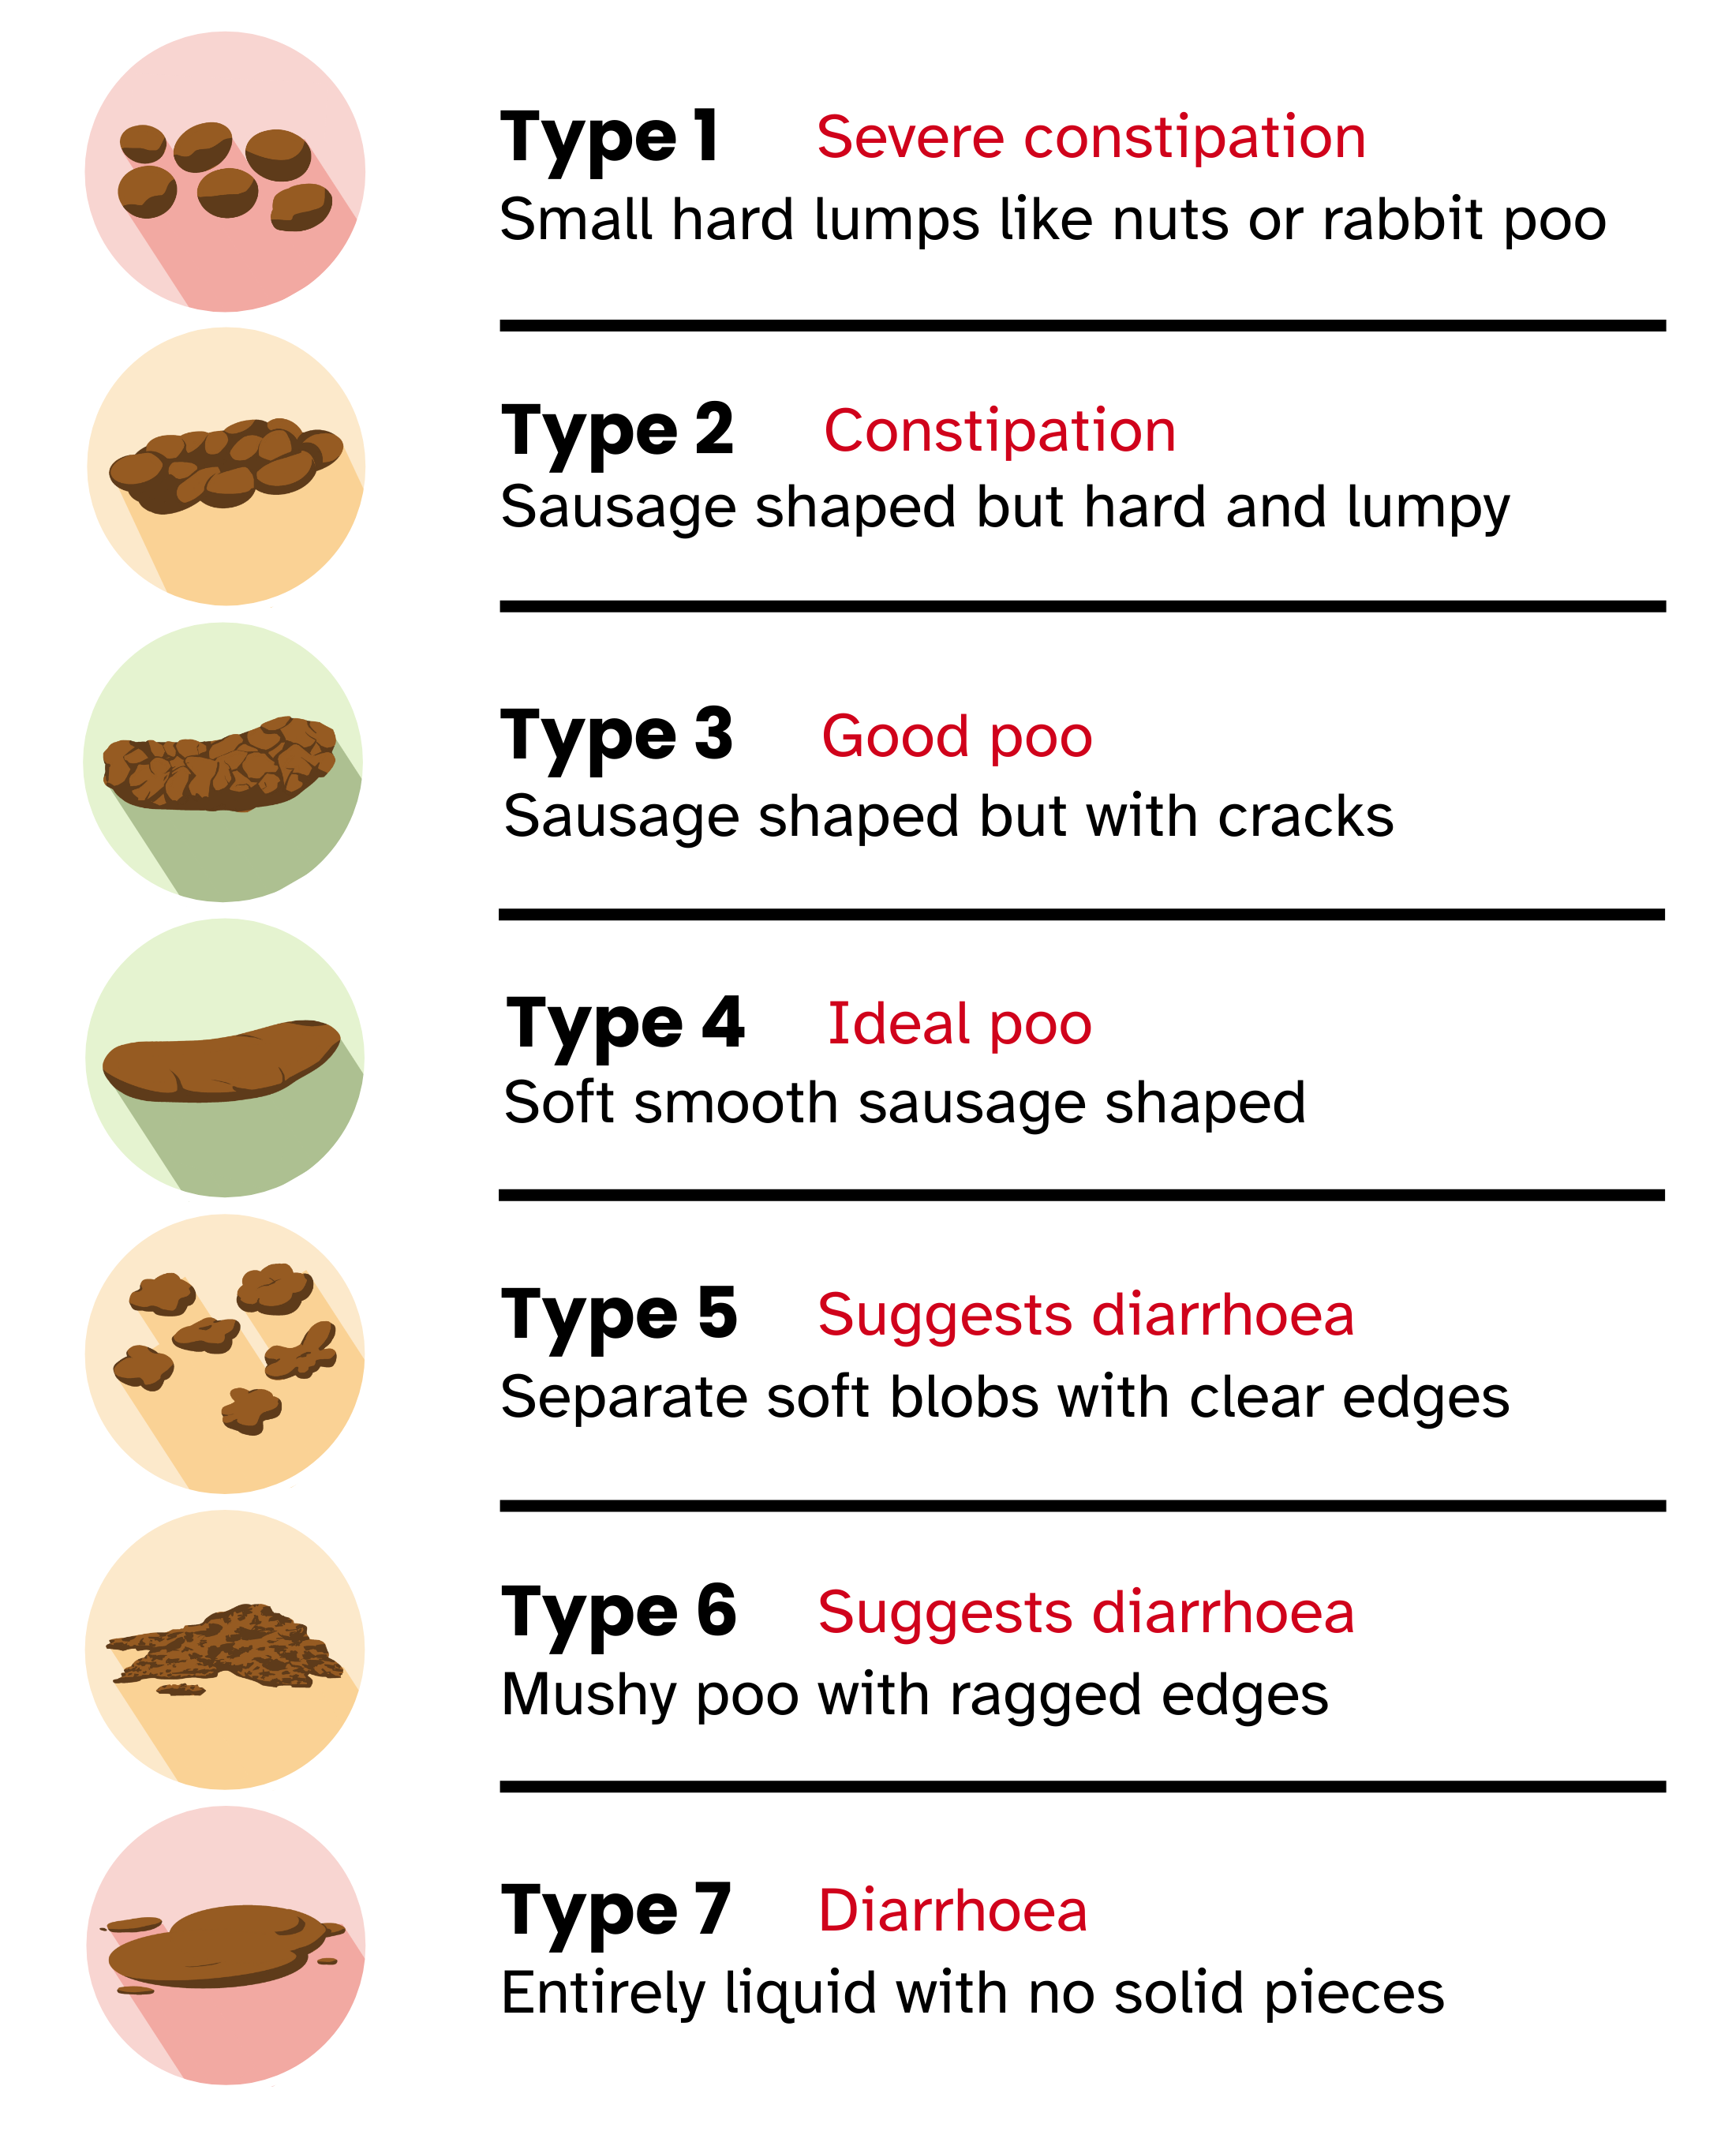 Type 1: small hard lumps like nuts or rabbit poo shows severe constipation, Type 2: Sausage shaped but hard and lumpy shows constipation, Type 3: Sausage shaped but with cracks is a good poo, Type 4: Soft smooth sausage shaped is the ideal poo, Type 5: Separate soft blobs with clear edges suggests diarrhoea, Type 6: Mushy poo with ragged edges suggests diarrhoea, Type 7: Entirely liquid with no solid pieces is diarrhoea 